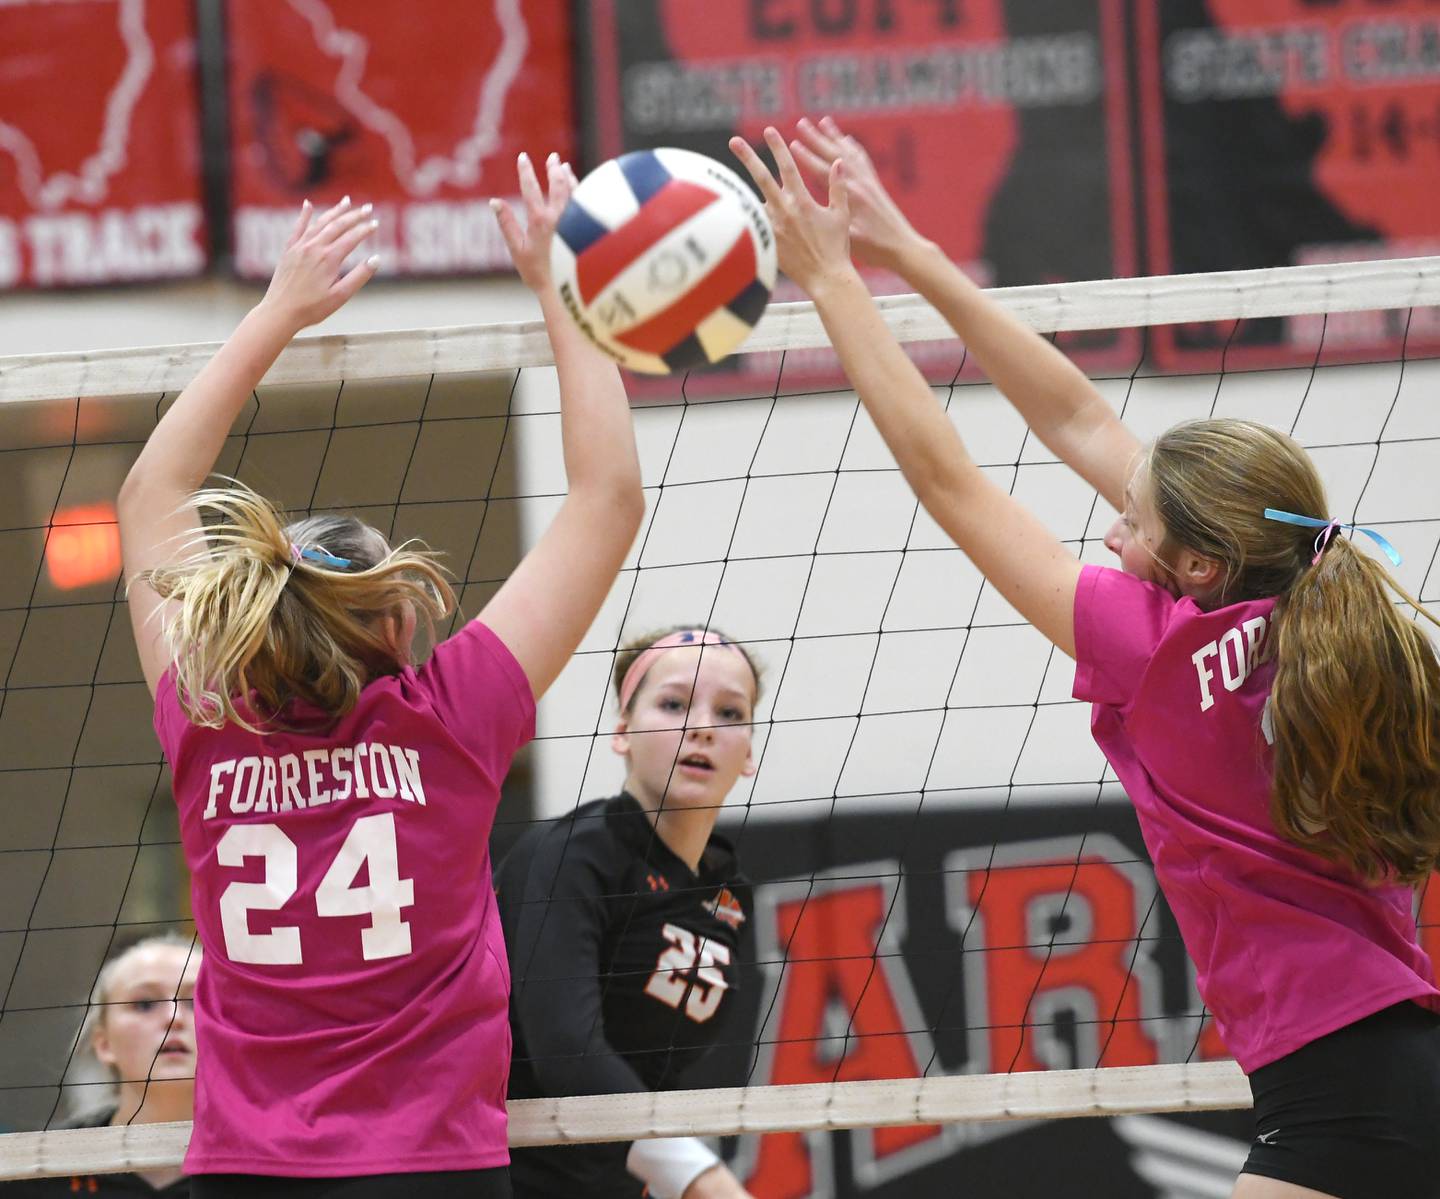 Milledgeville's Lilianna Smith spikes between two Forreston blockerss during the Volley for the Cure game on Tuesday, Sept. 27.